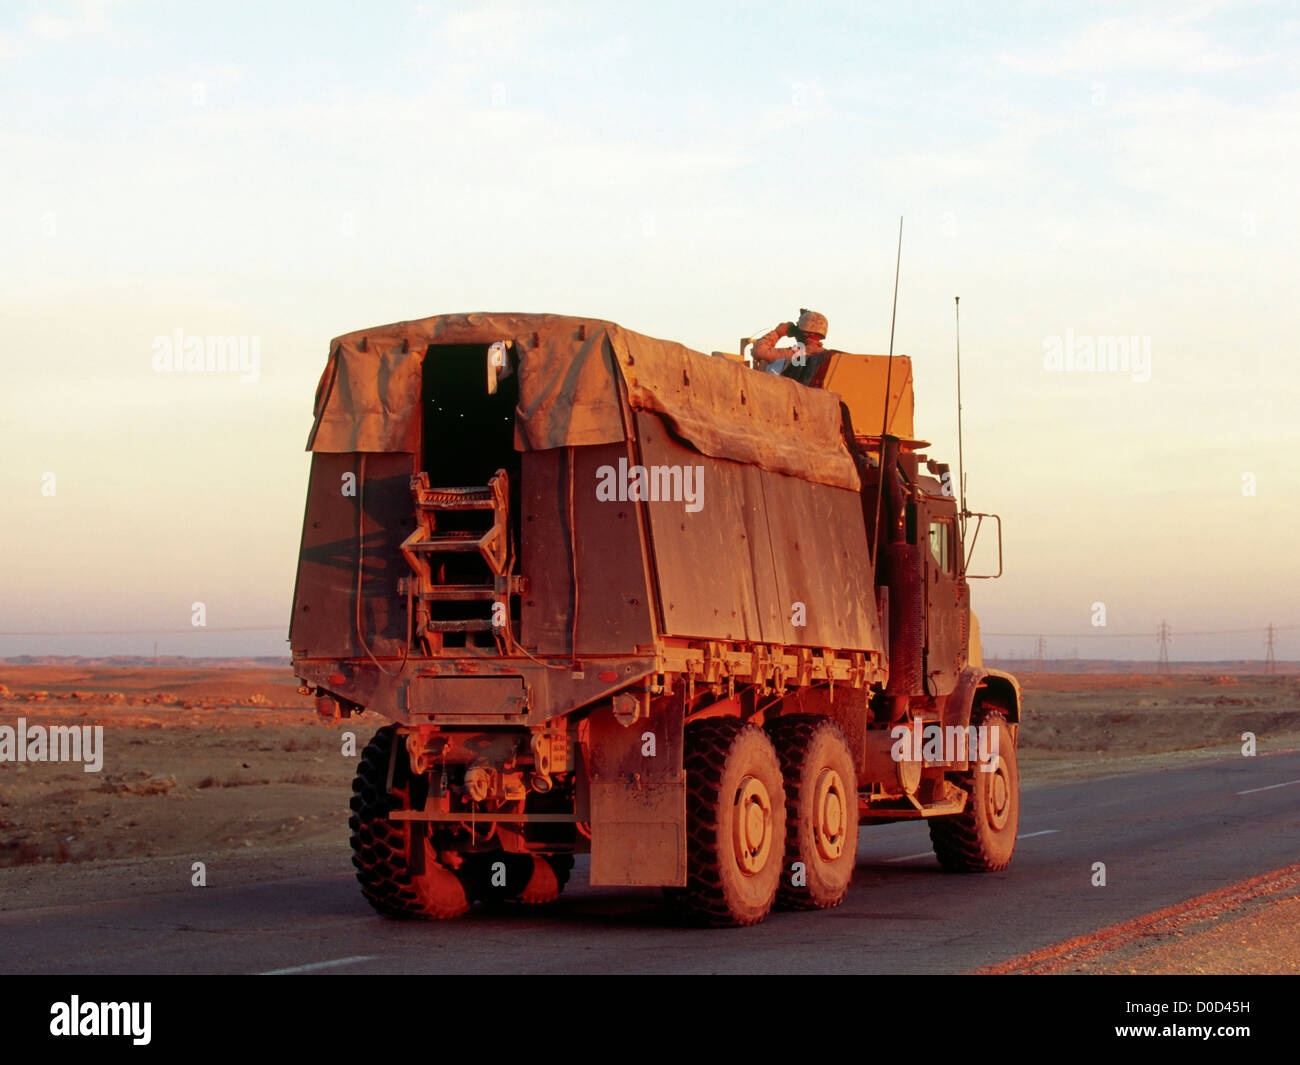 A US Marine 7 Ton Transport Slowly Drives Along a Road in Iraq's Anbar Province During a Sweep for Hidden Explosives Stock Photo